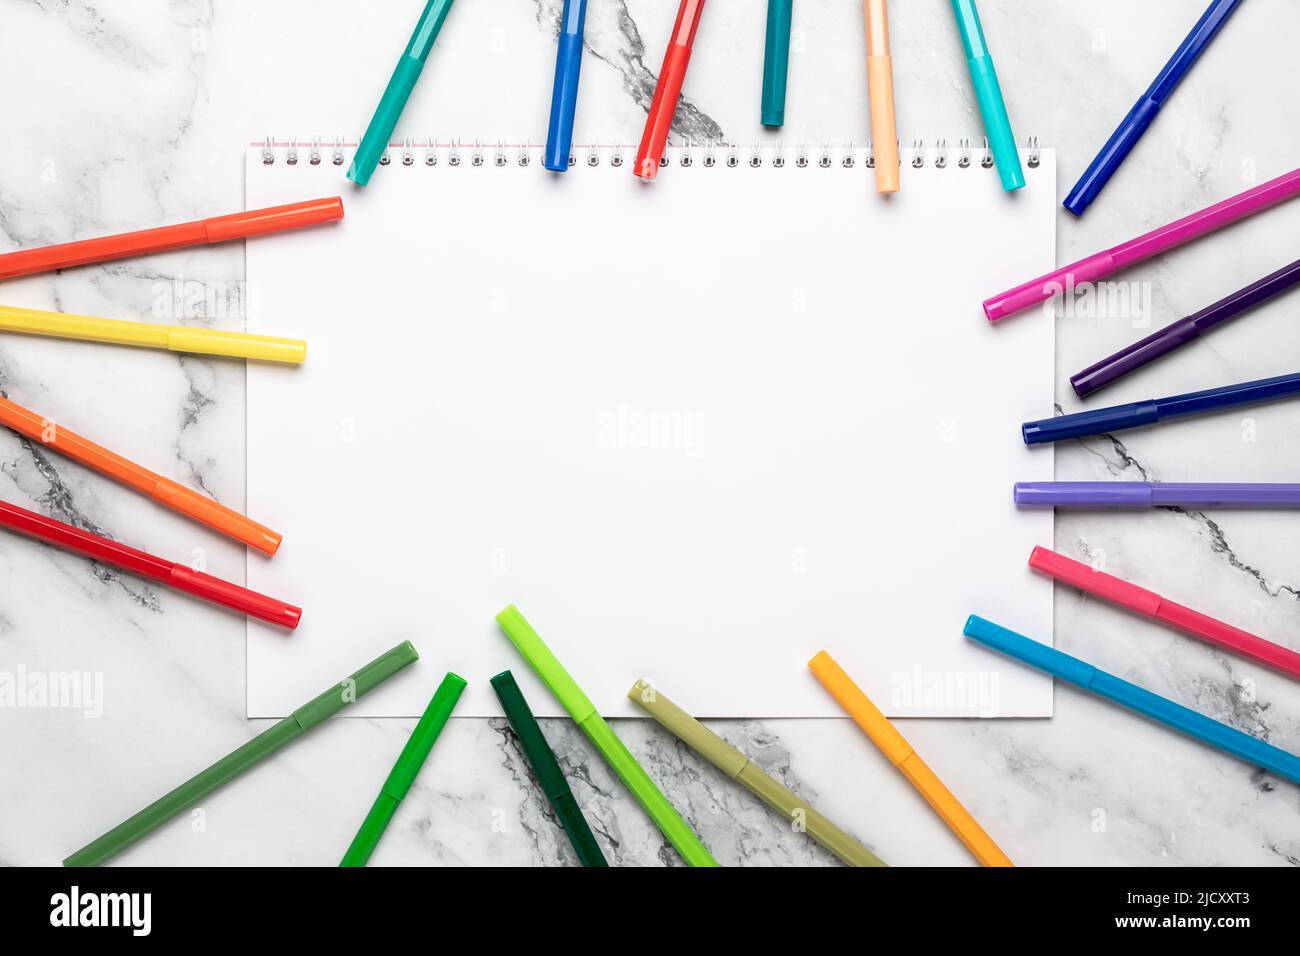 https://c8.alamy.com/comp/2JCXXT3/background-with-pencils-and-white-blank-paper-felt-pens-frame-open-sketchbook-mockup-template-colored-markers-for-drawing-on-a-marble-desk-flat-2JCXXT3.jpg